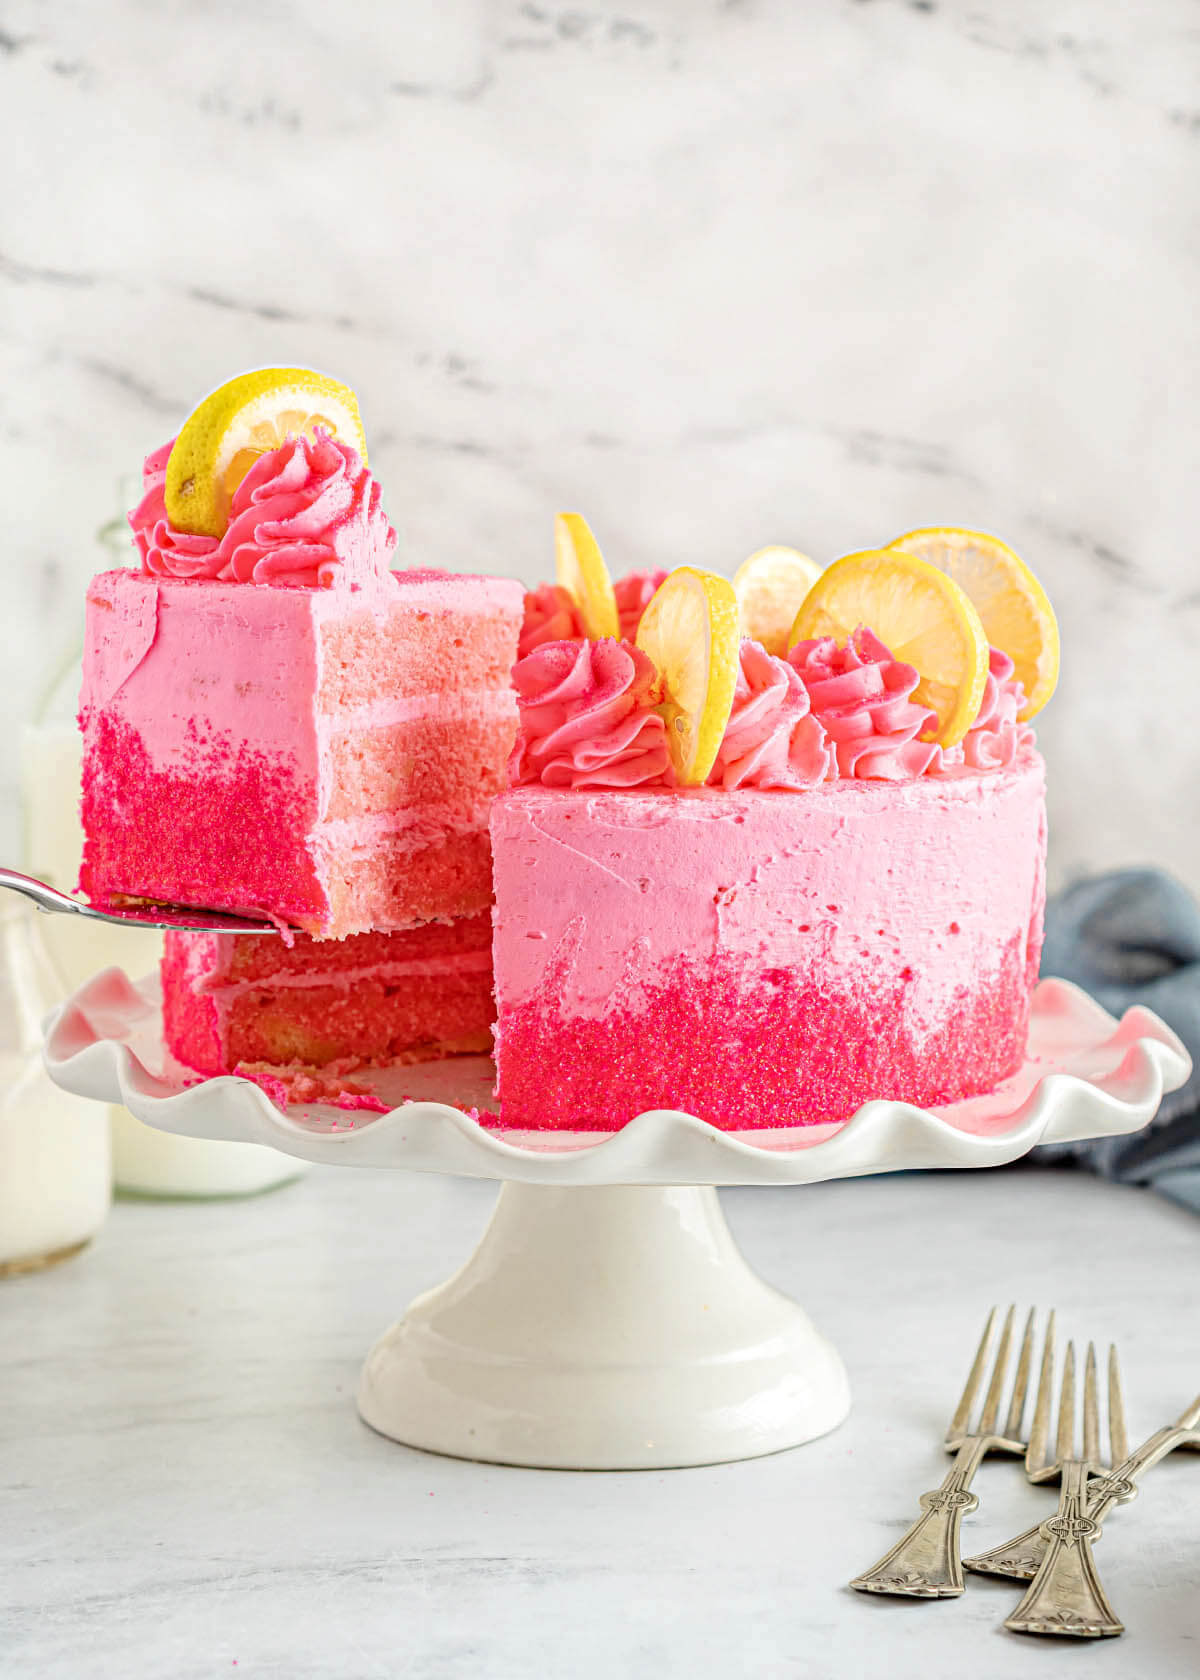 Pink Lemonade Cake with slice being lifted.